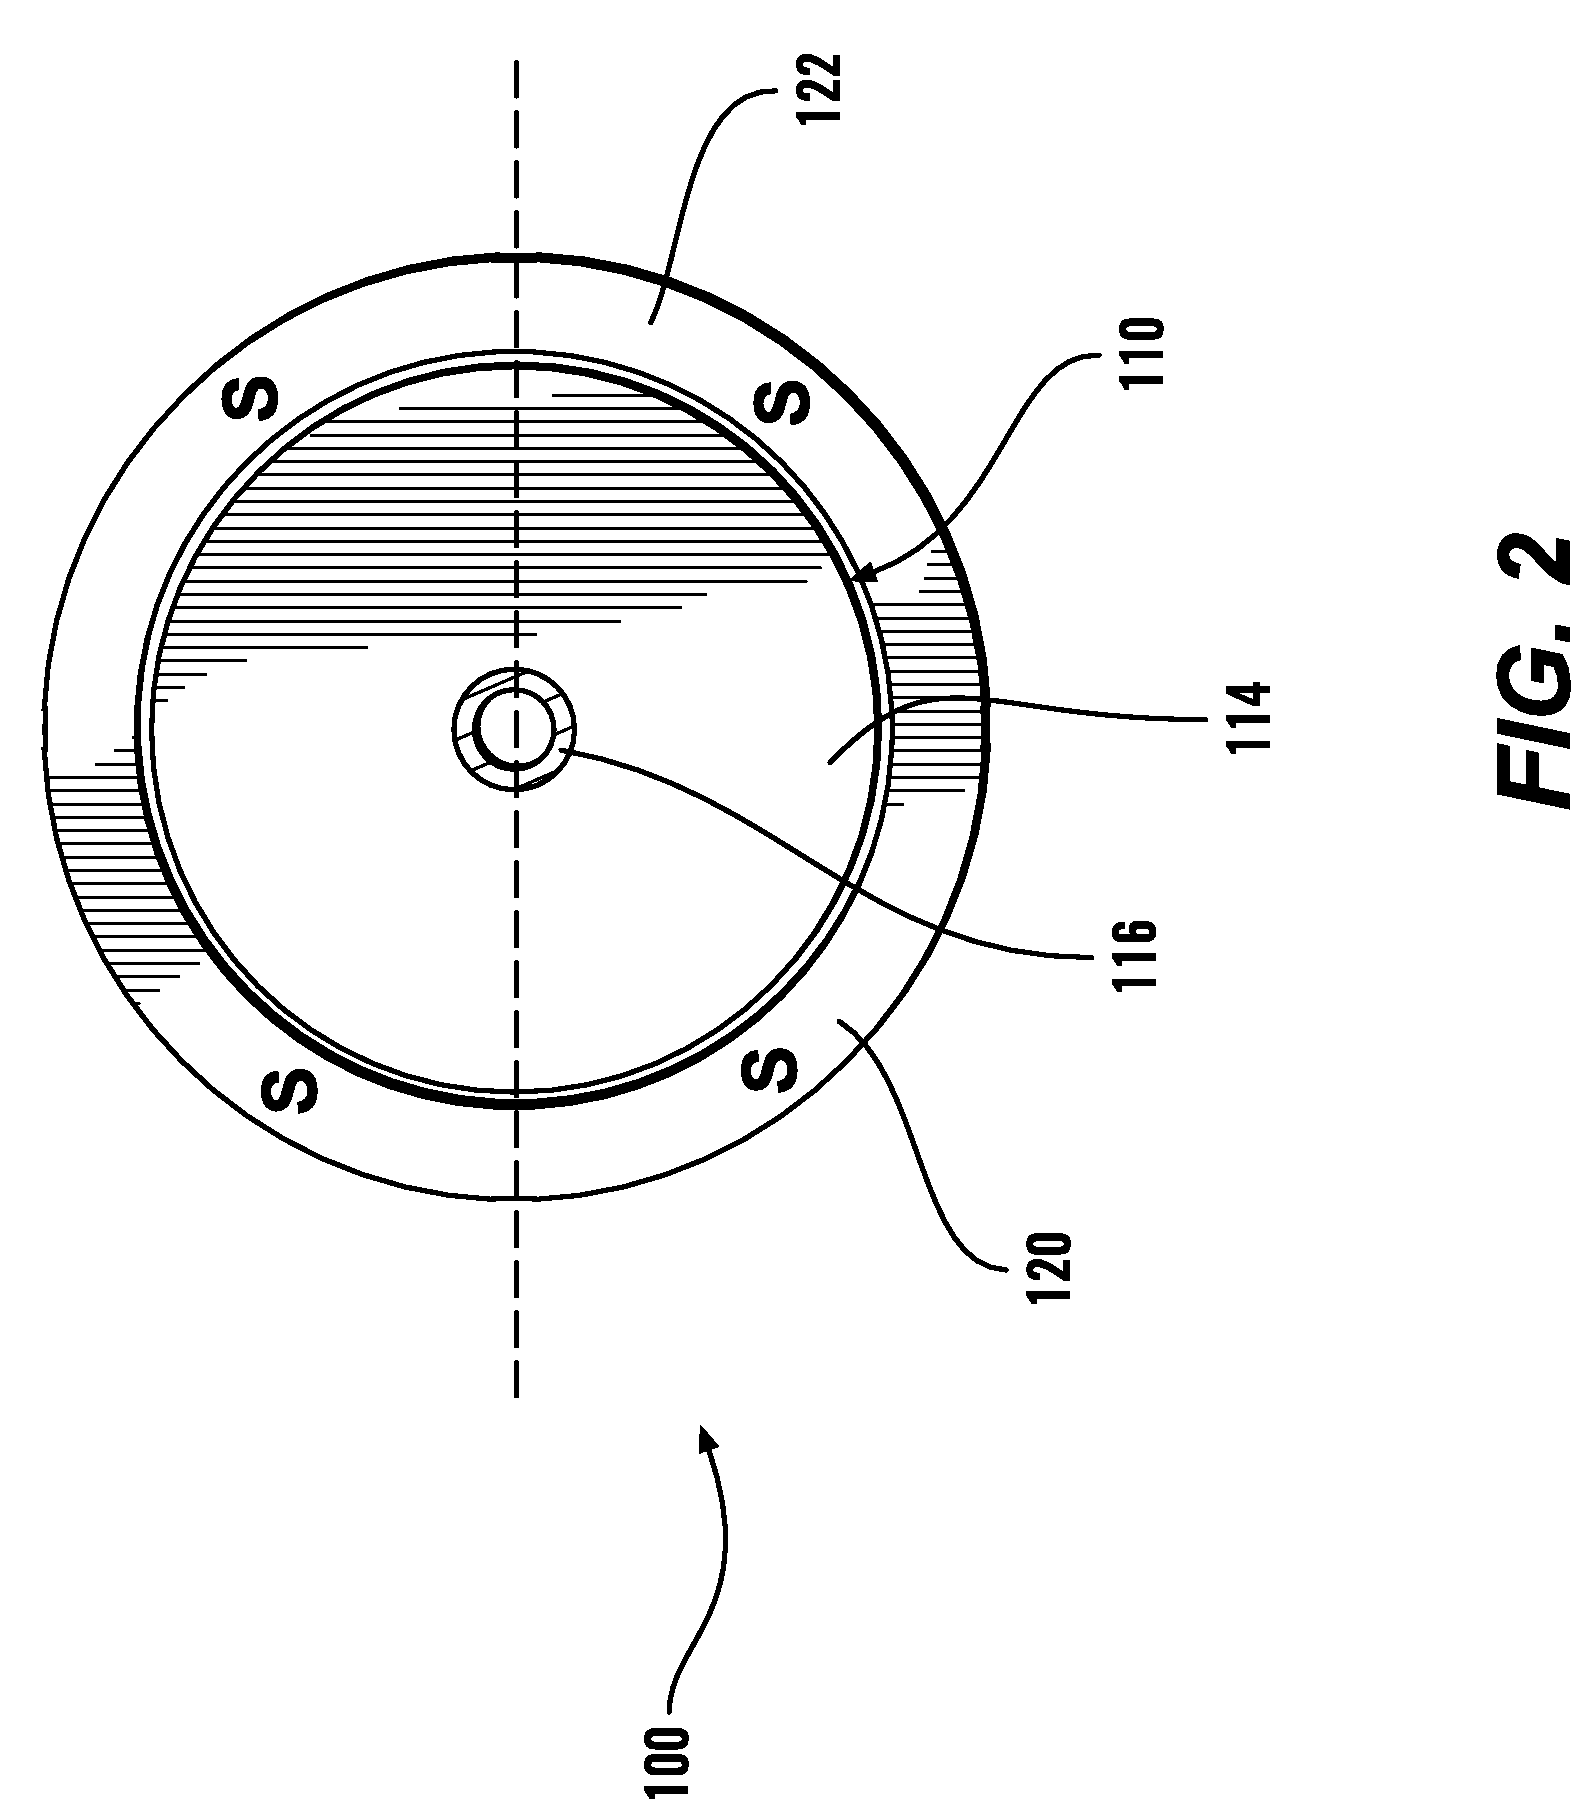 Non-ambipolar radio-frequency plasma electron source and systems and methods for generating electron beams